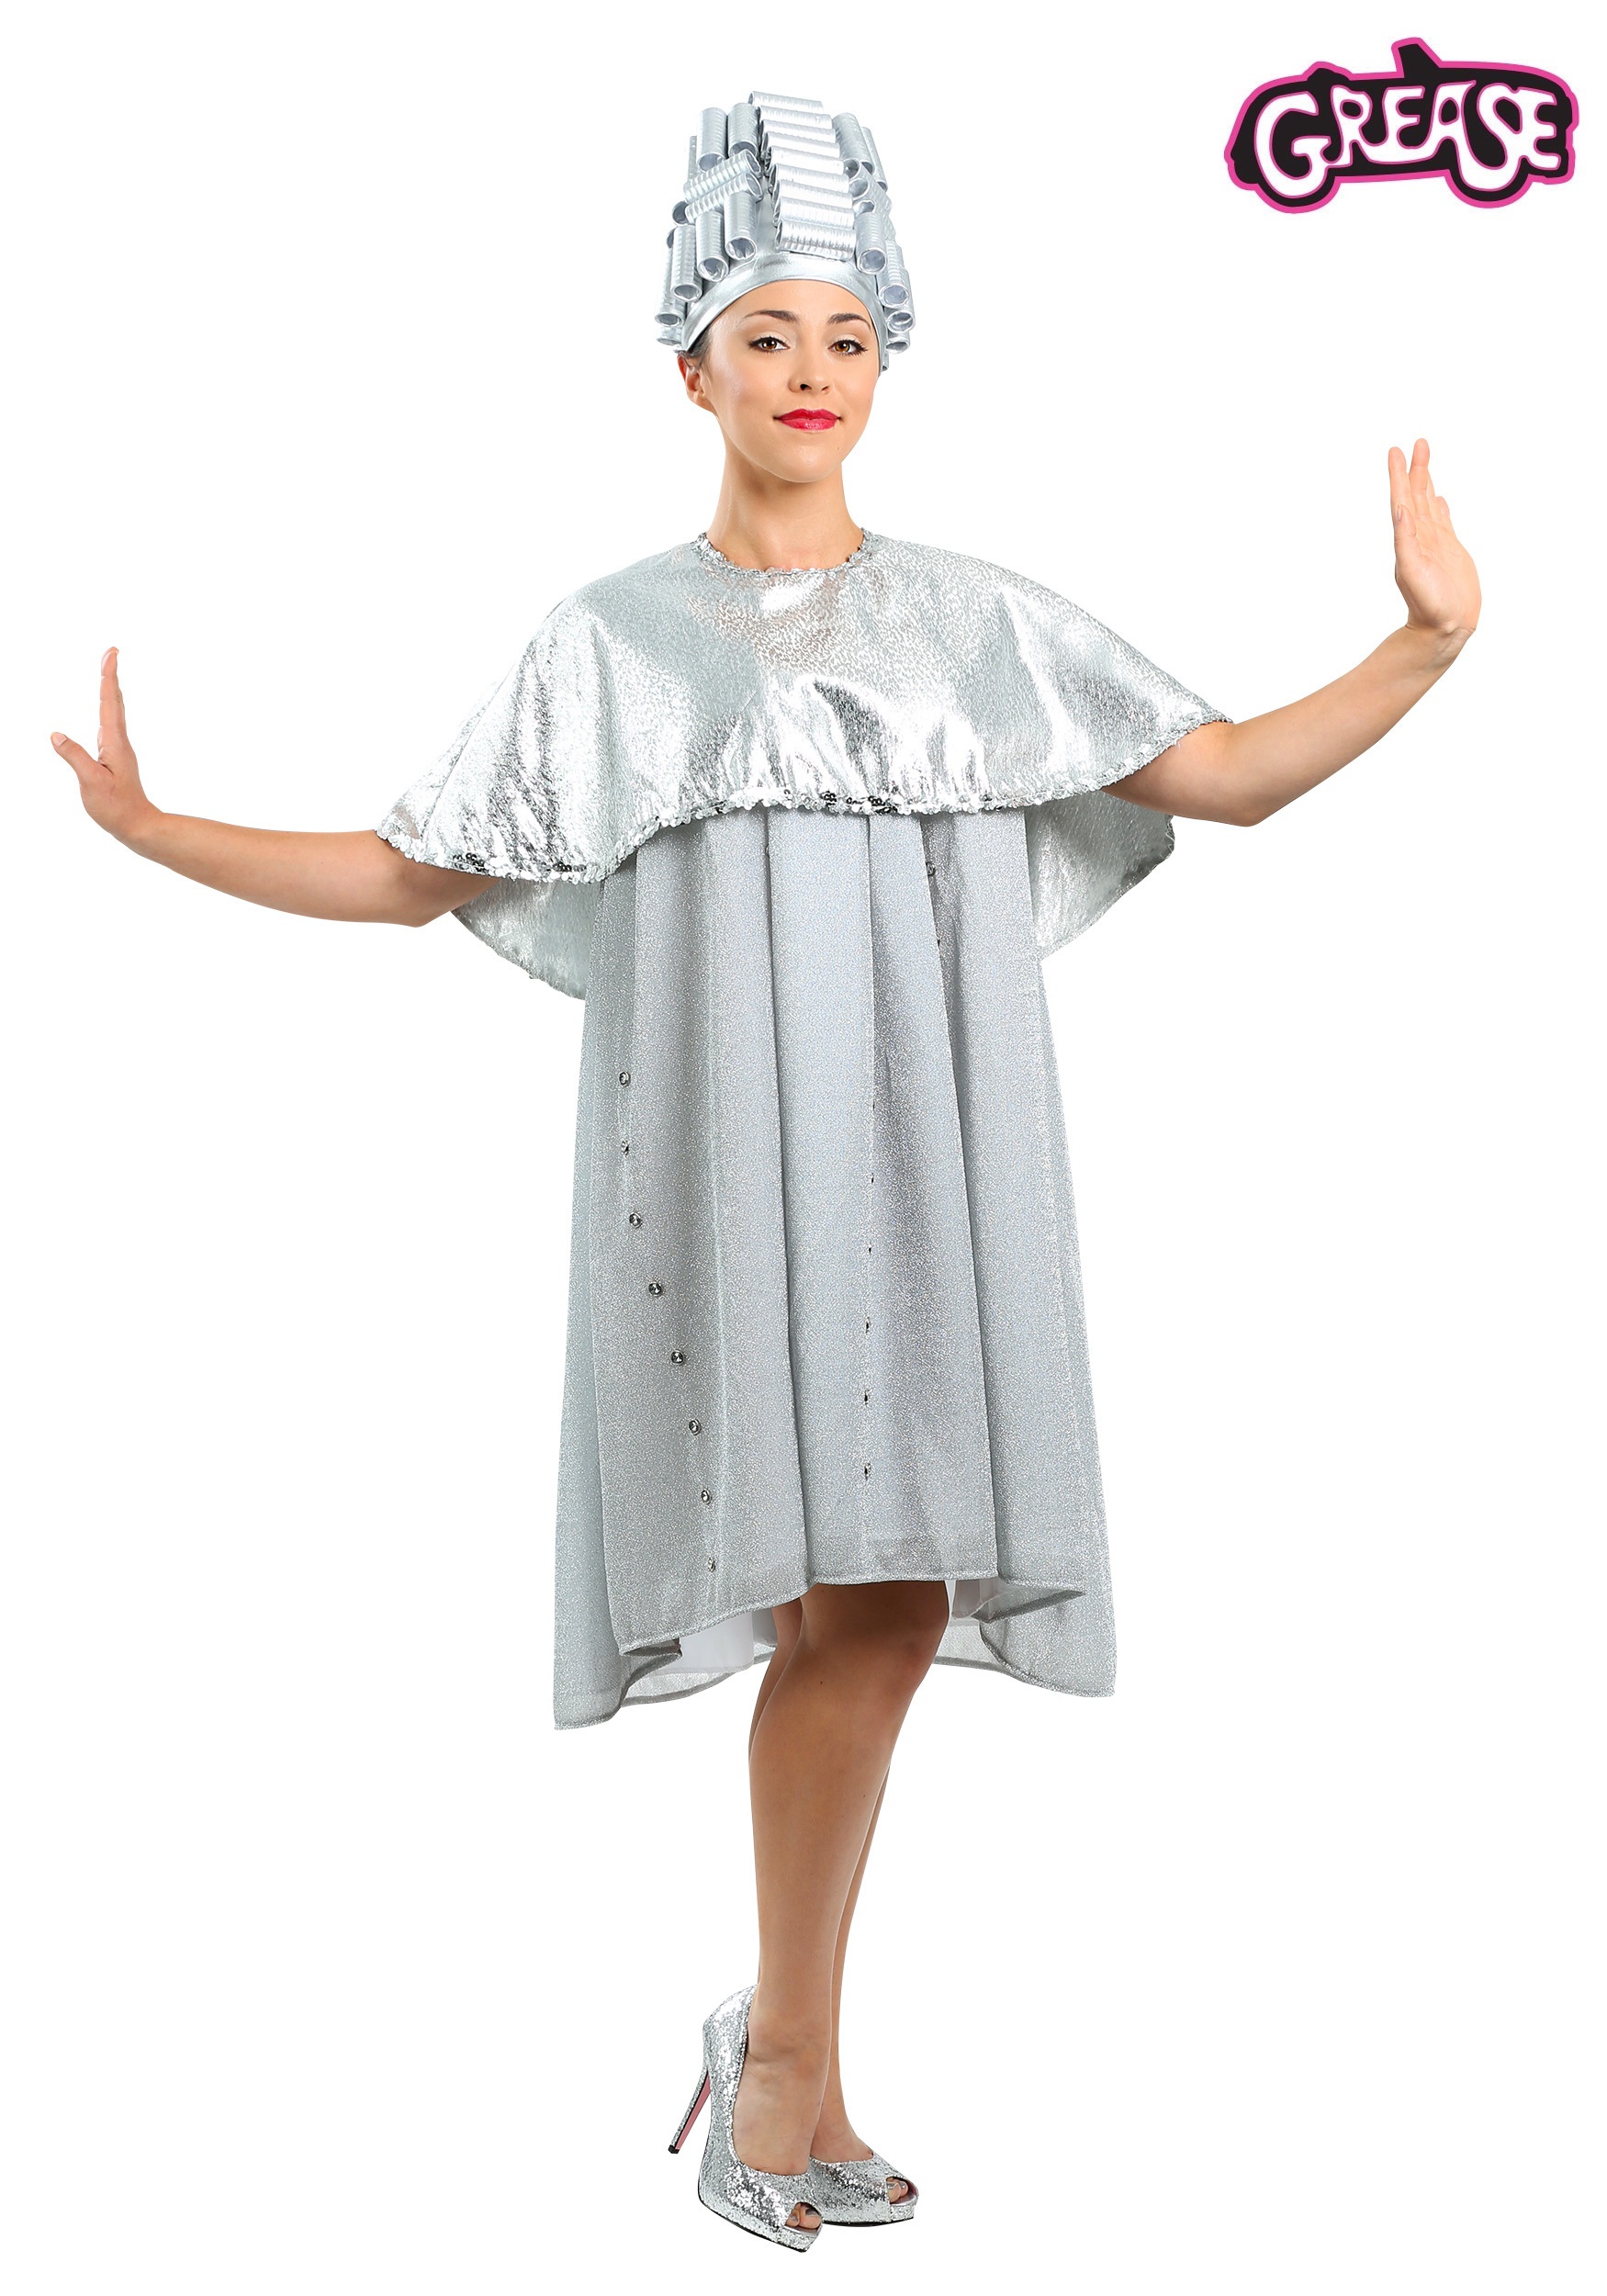 Grease Beauty School Size Costume | Grease Costumes